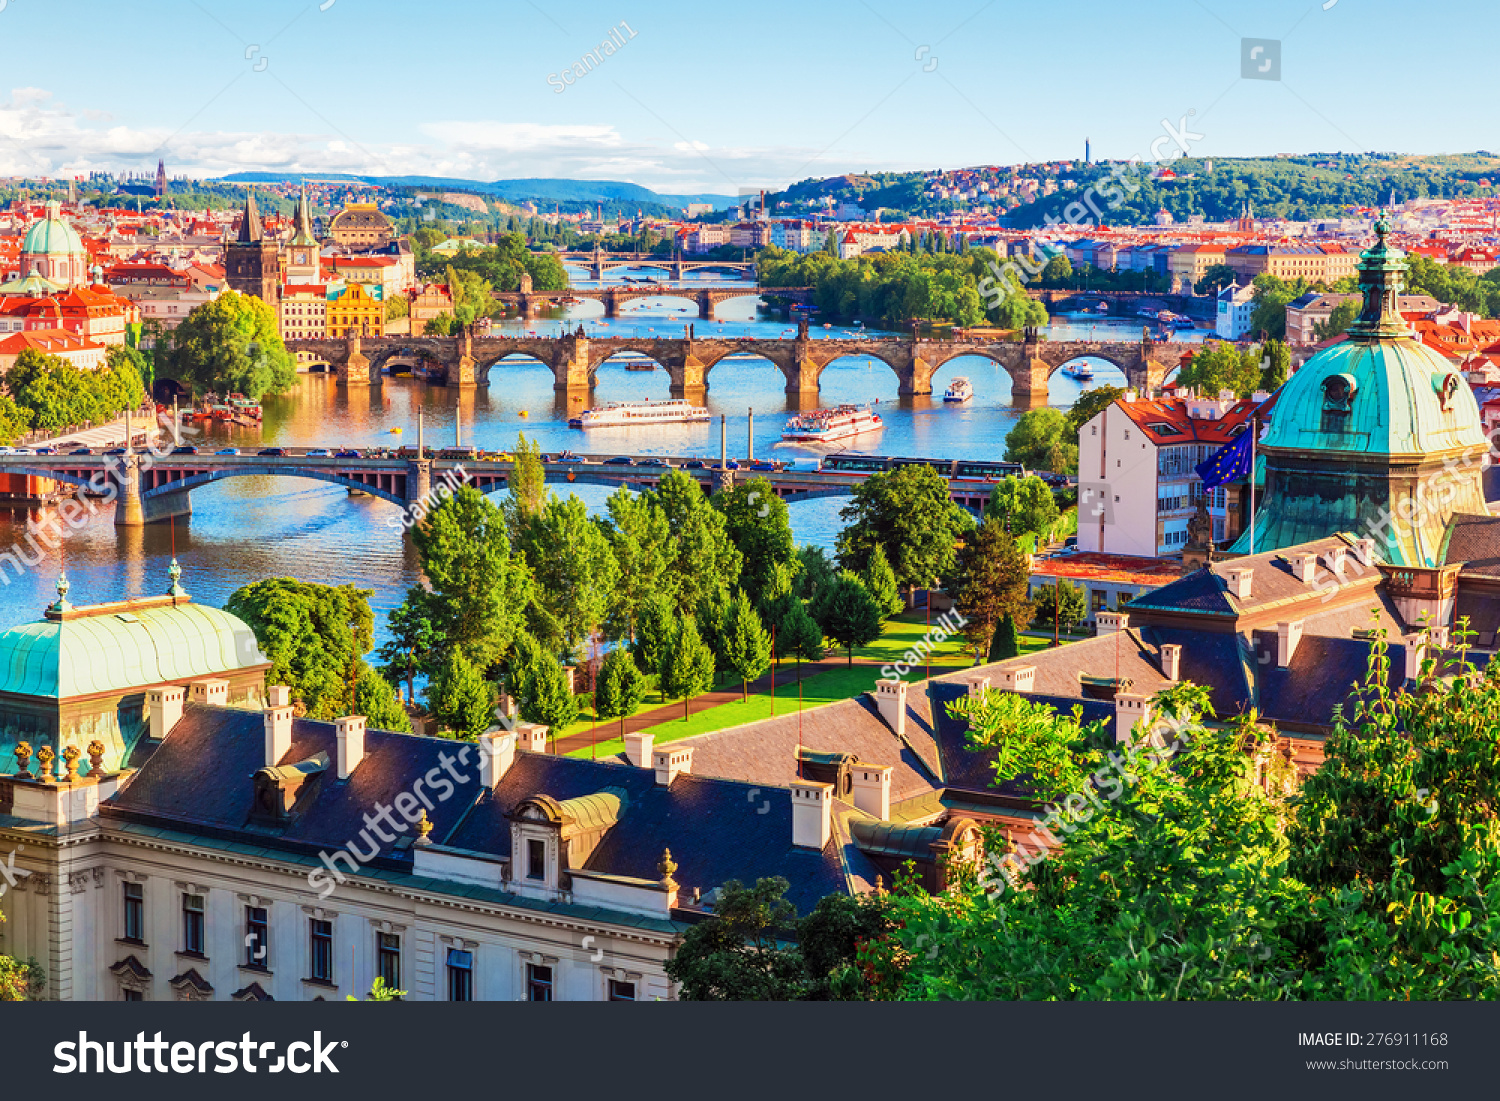 Scenic summer sunset aerial view of the Old Town pier architecture and Charles Bridge over Vltava river in Prague, Czech Republic #276911168